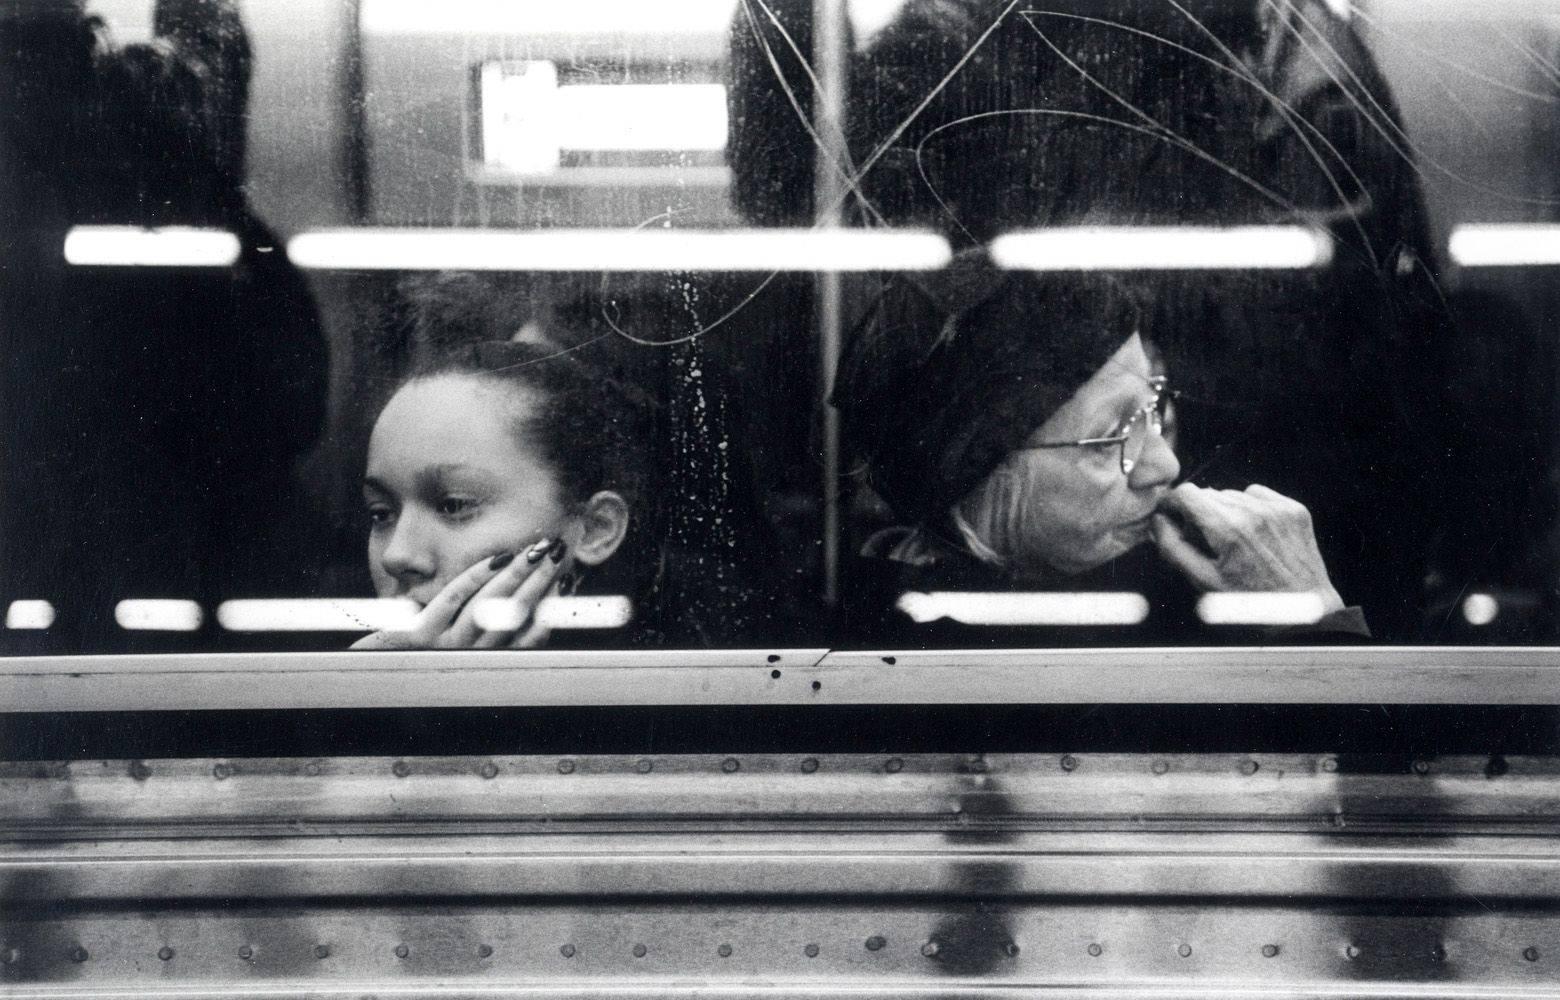 Kazuo Sumida Black and White Photograph - 23rd Street, 7th Avenue (from the series A Story of the New York Subway)